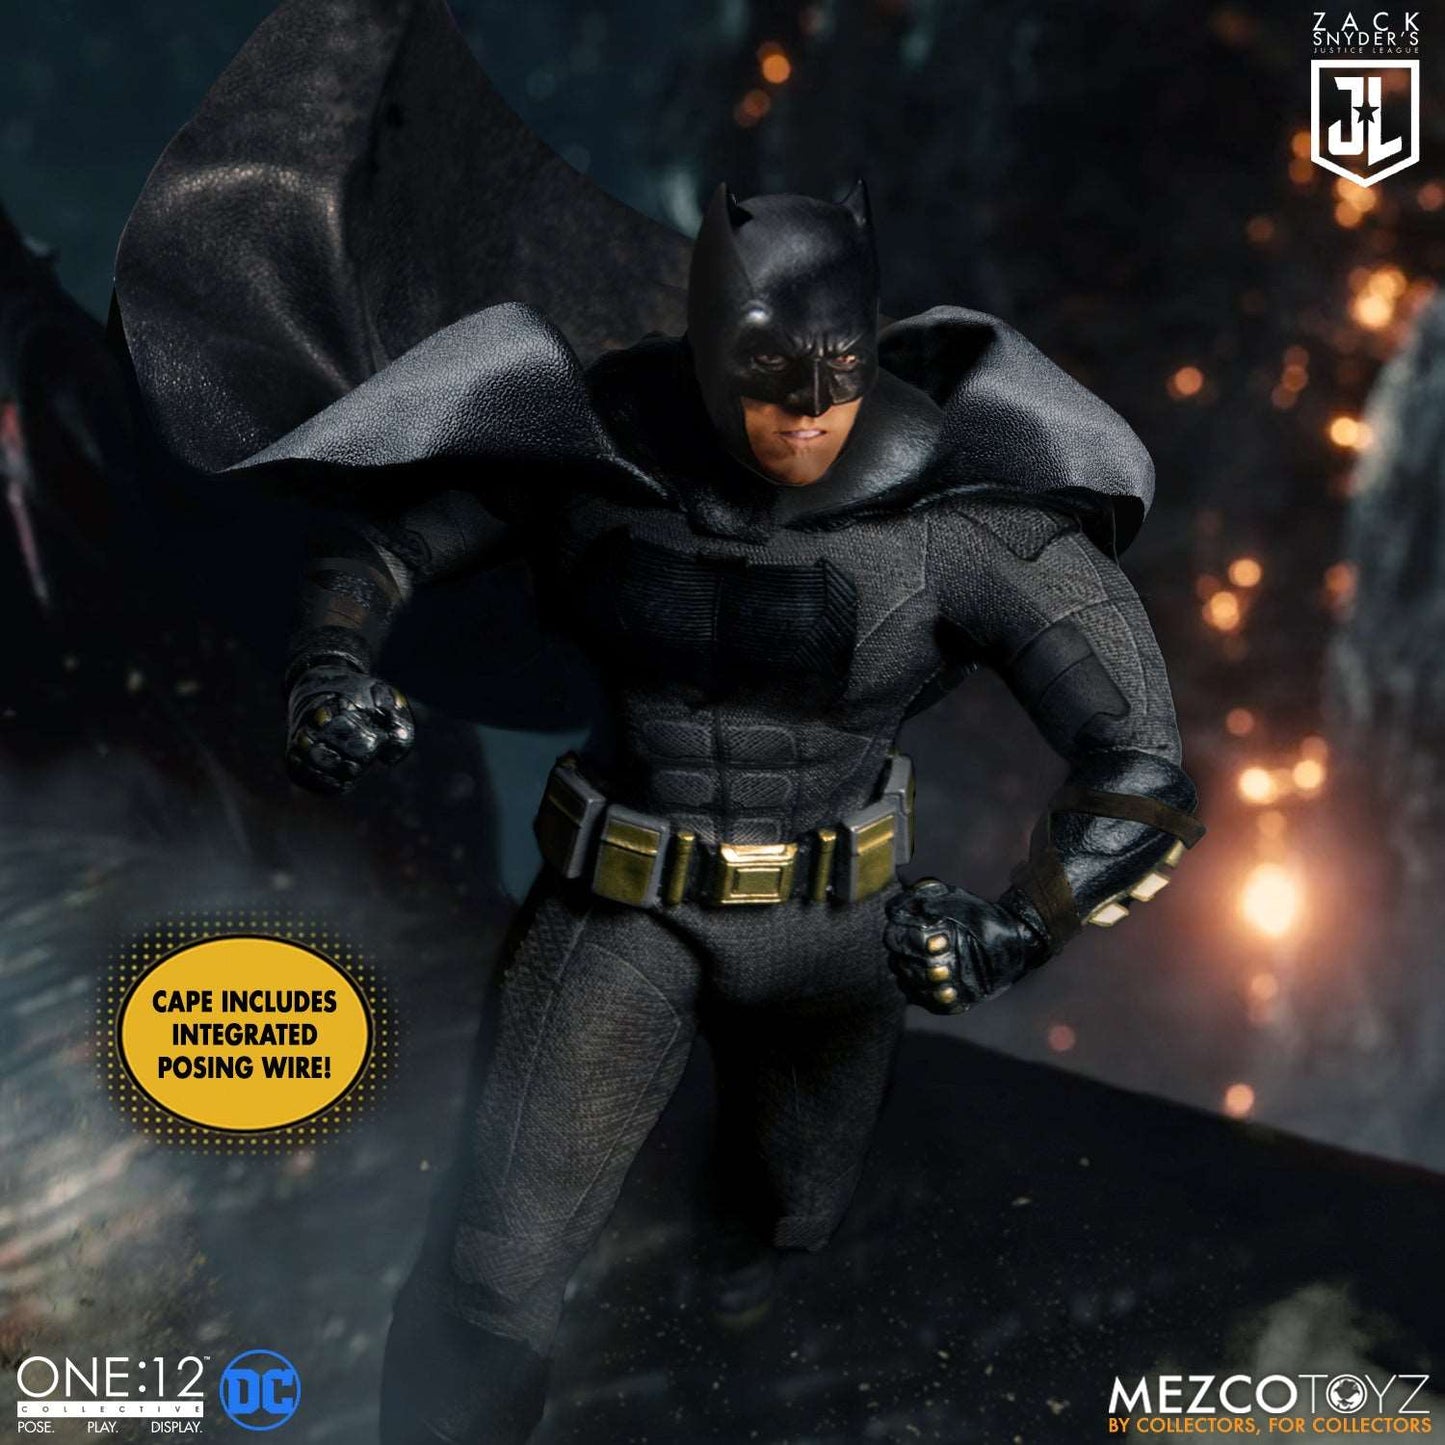 Mezco One Twelfth Collective Zack Snyder’s Justice League Deluxe Steel Boxed Set Batman figure with cape and integrated posing wire